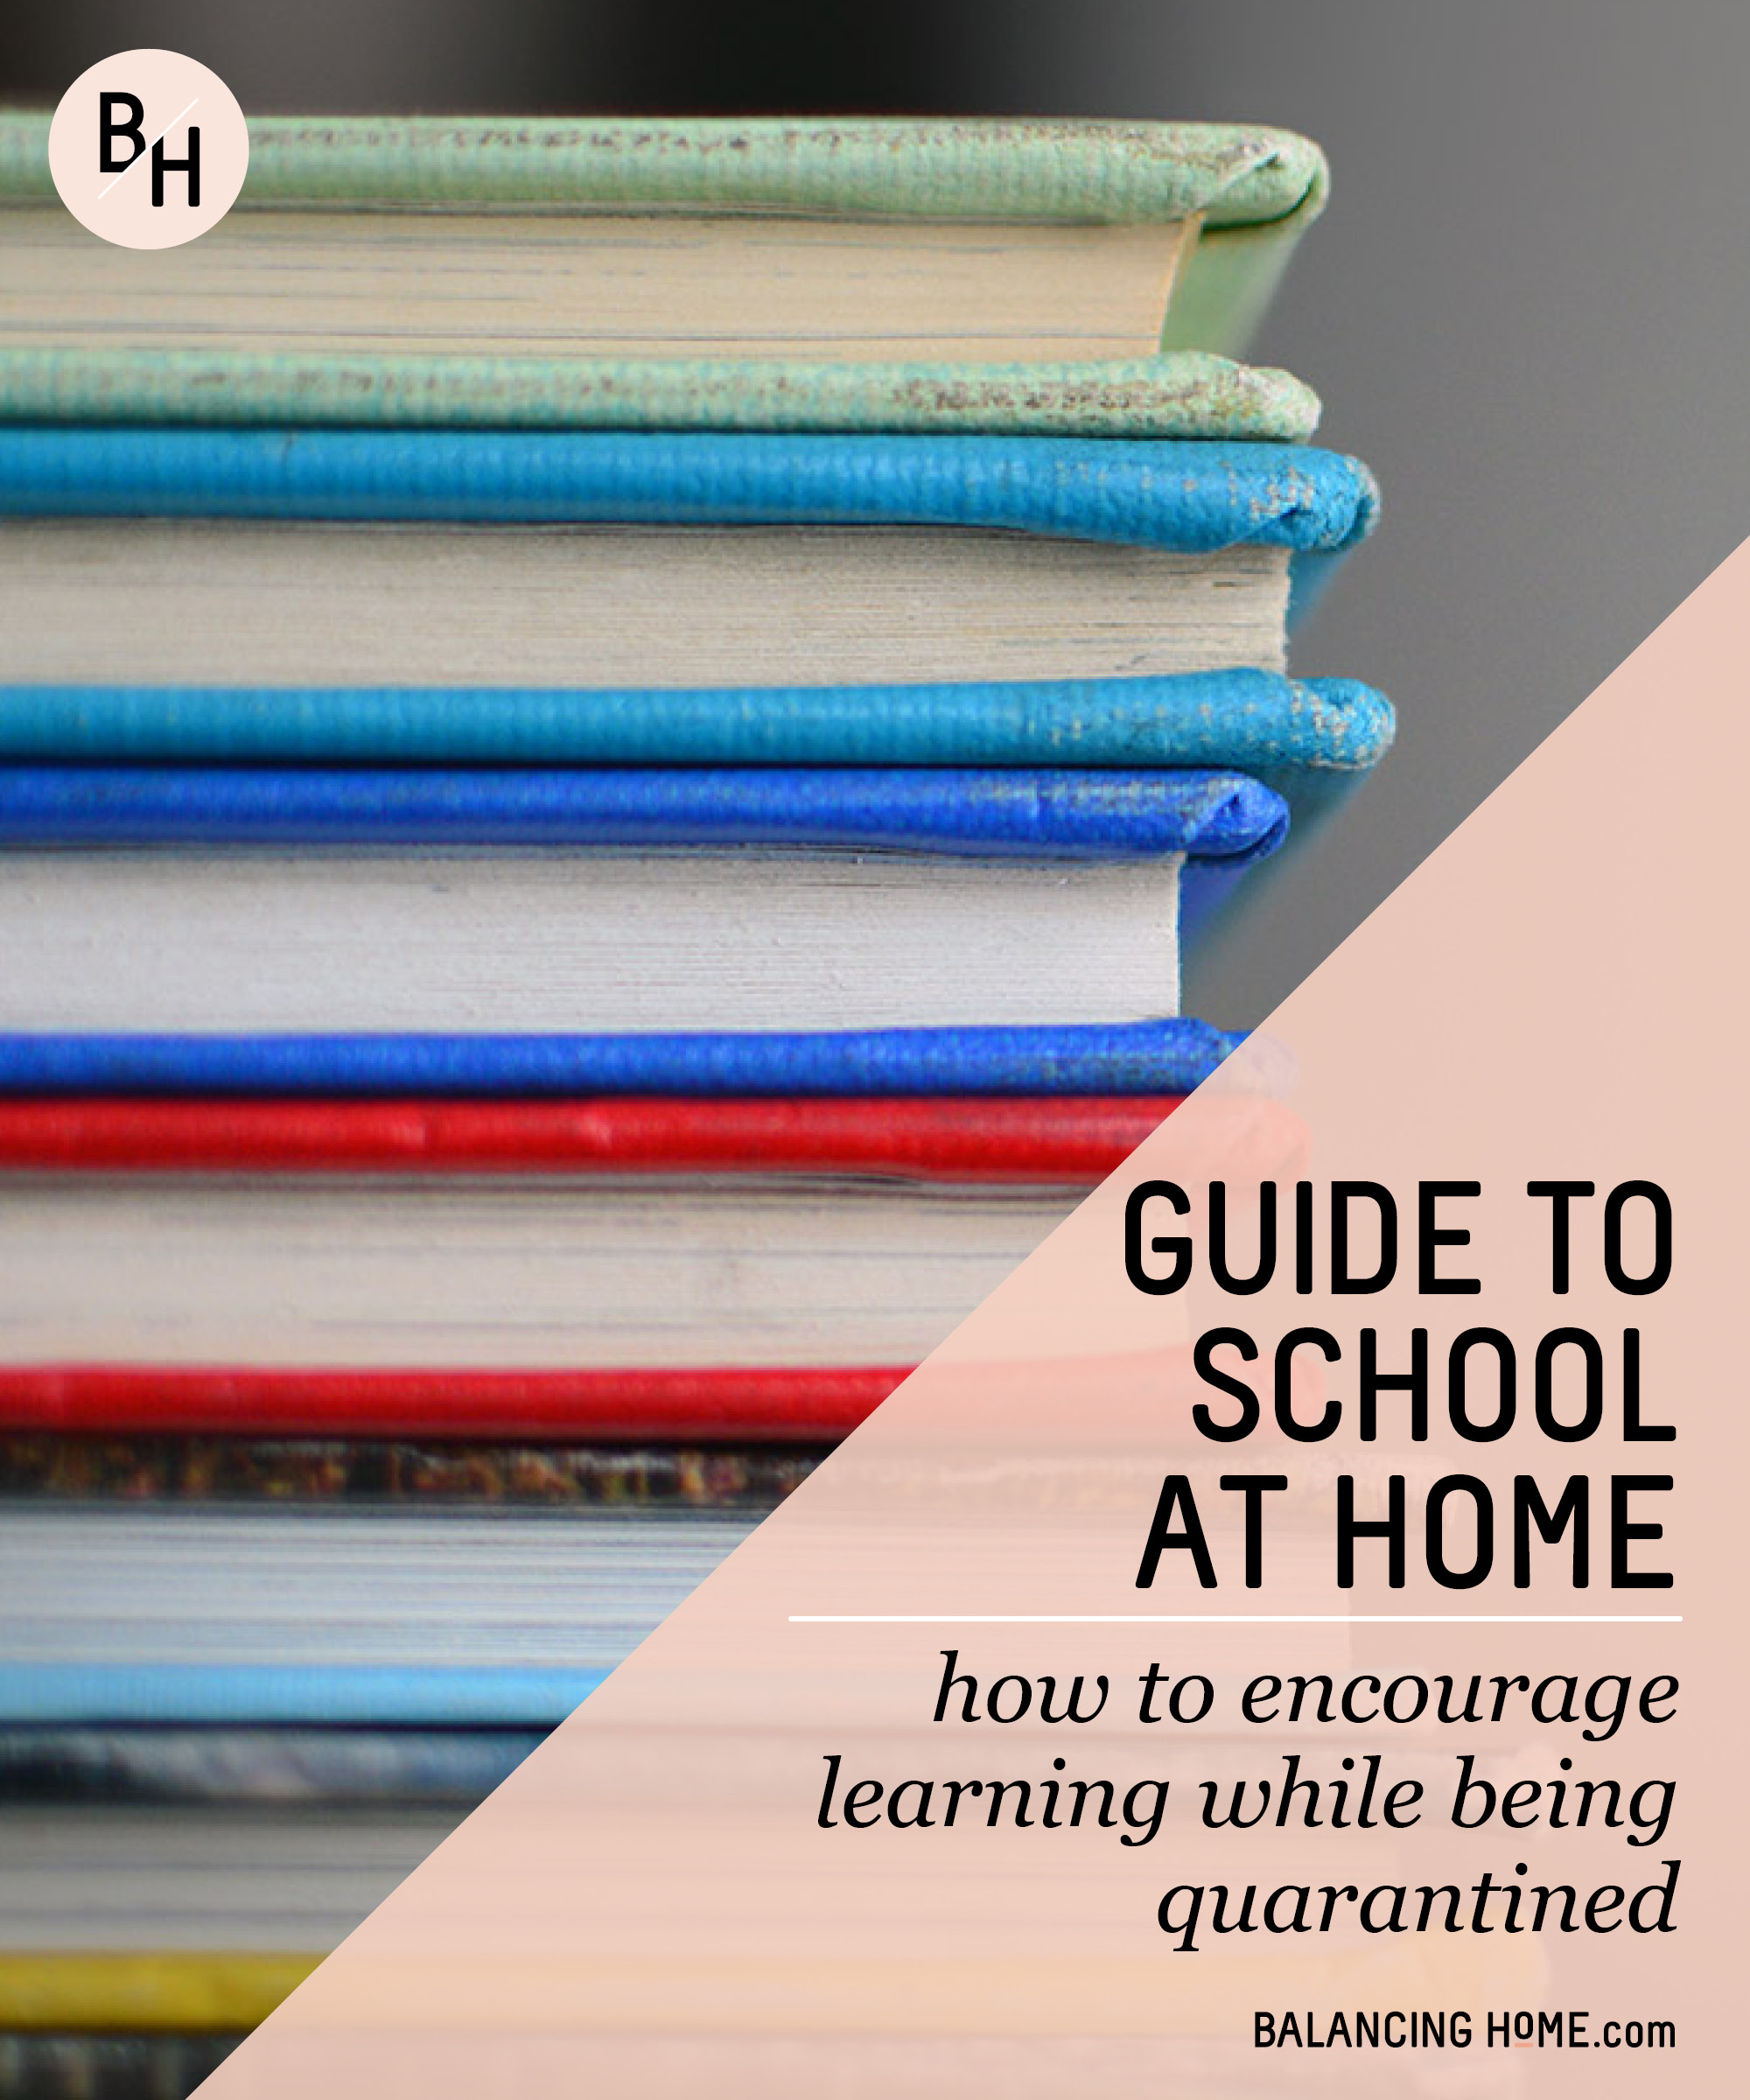 How to handle school at home durning quarantine